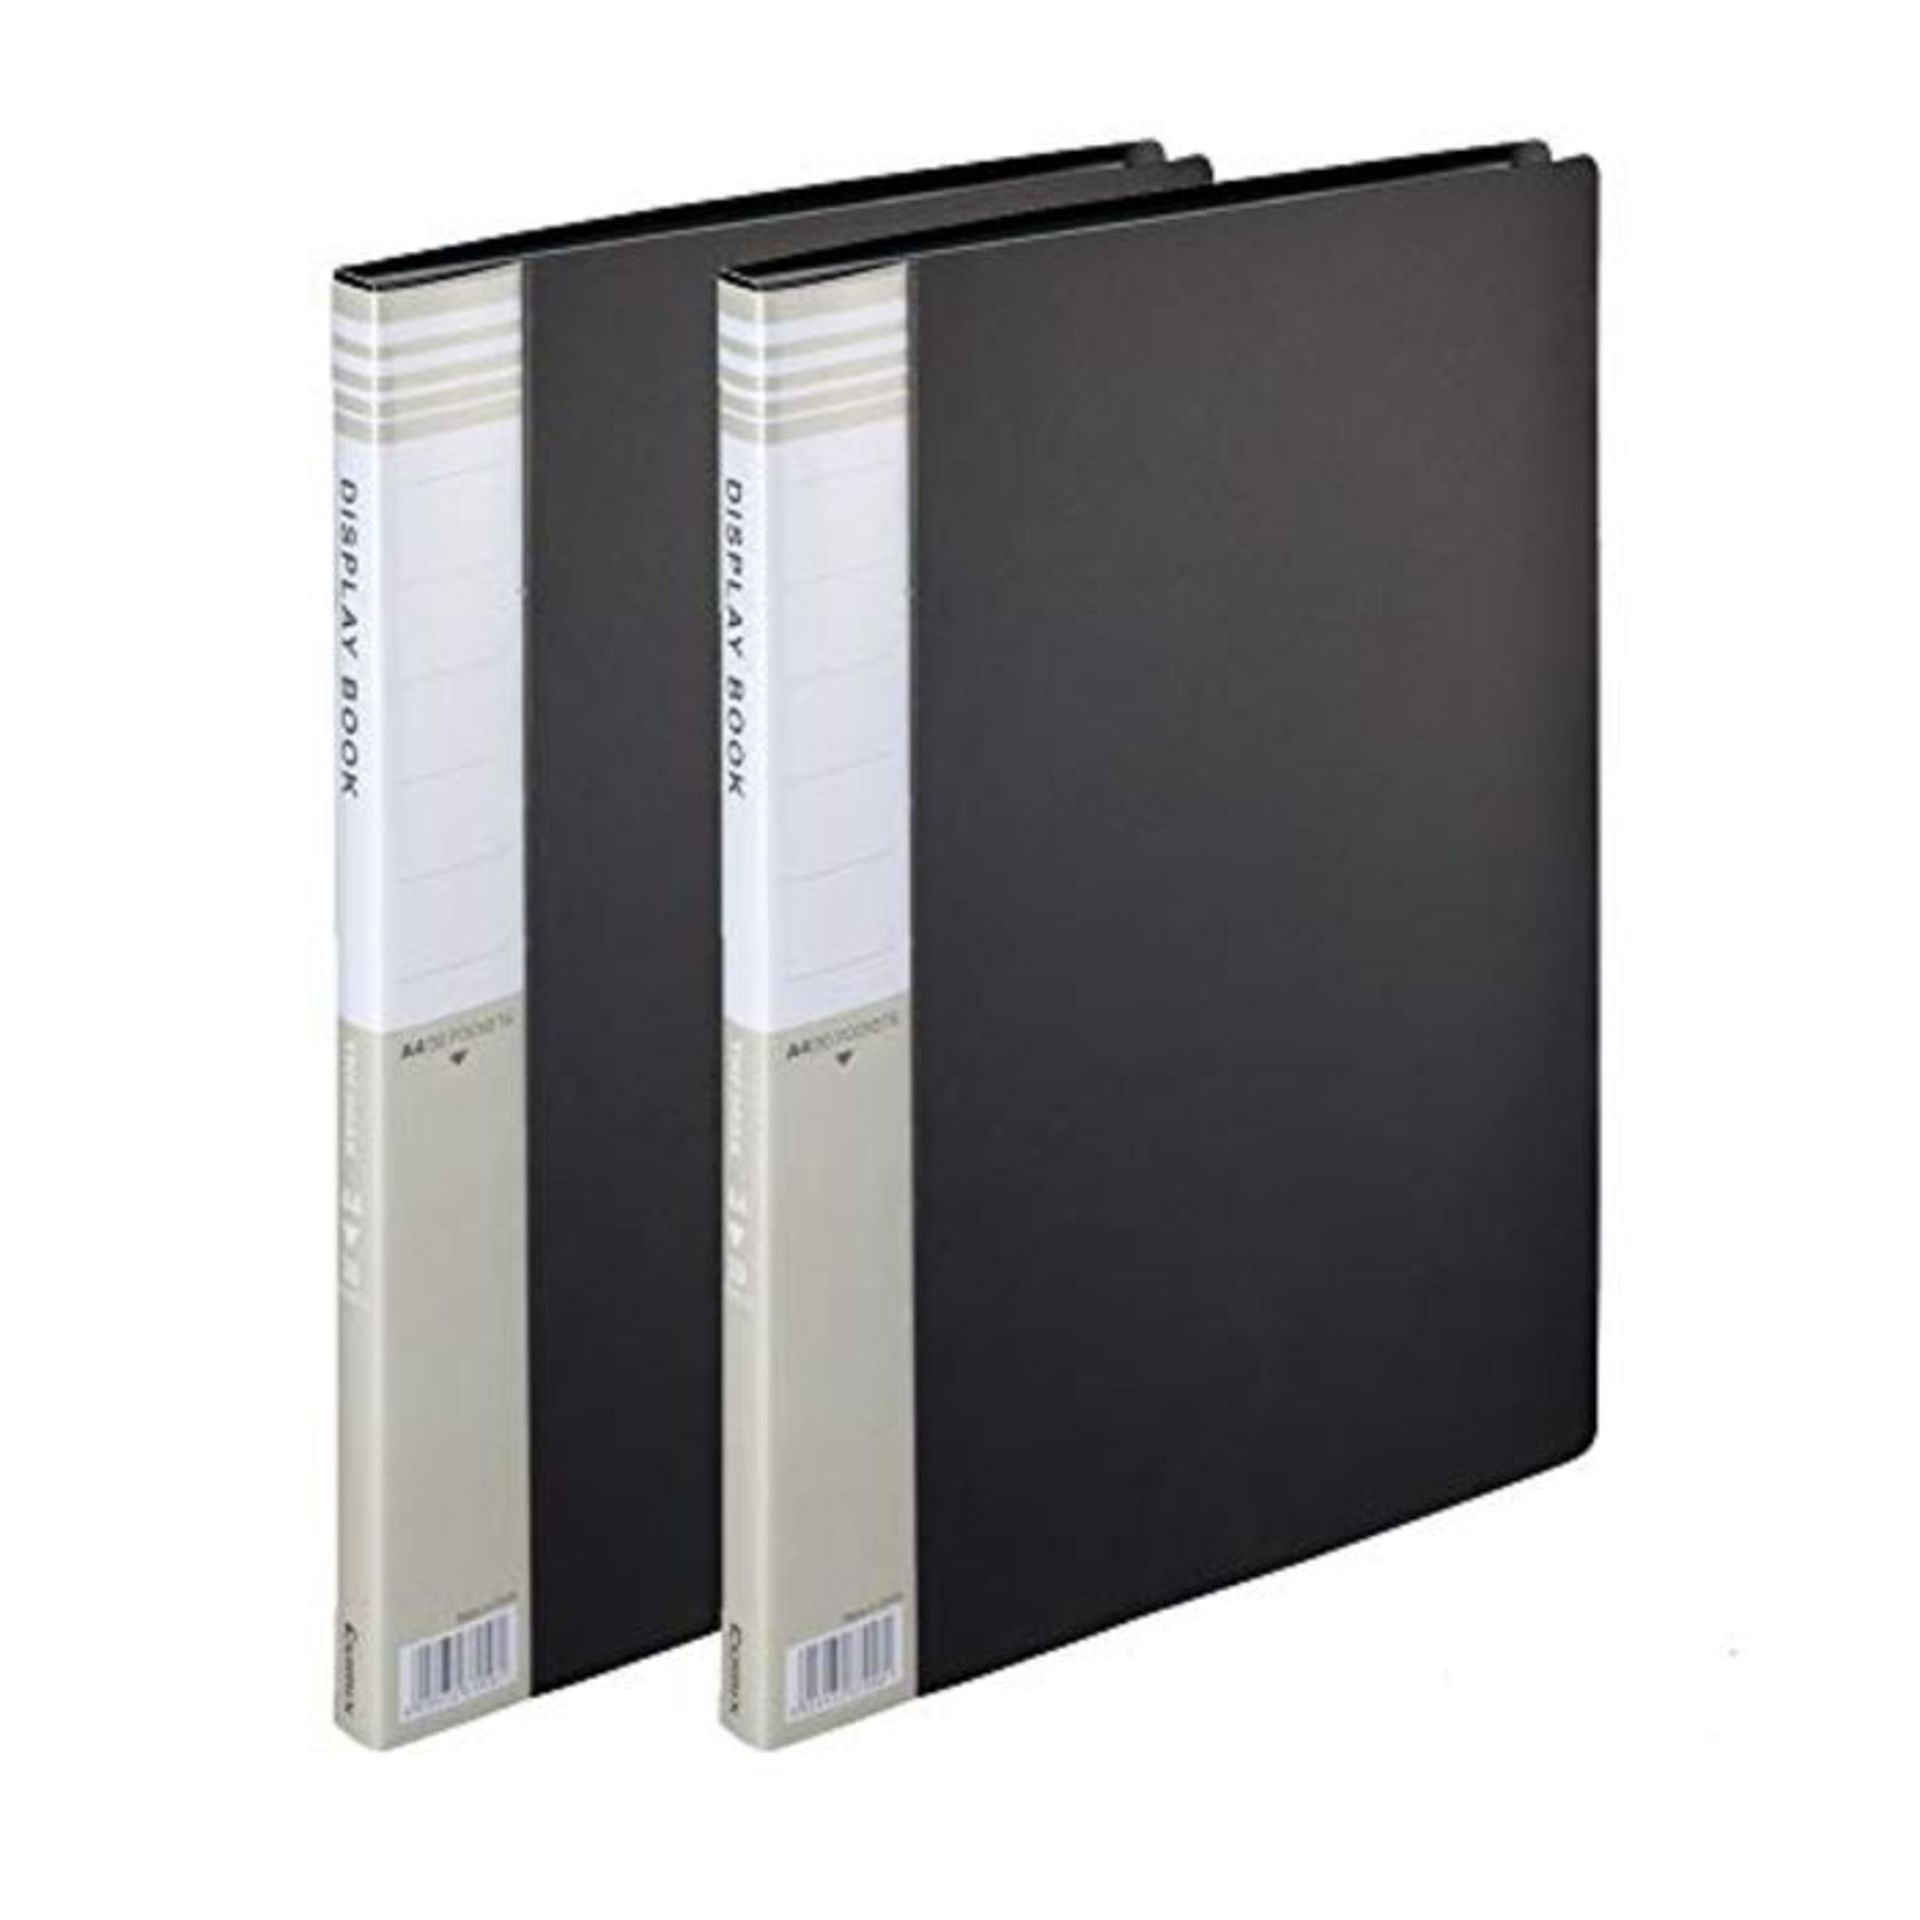 Comix A4 Display Books 30 Pockets Folders with Plastic Sleeves (Pack of 2)